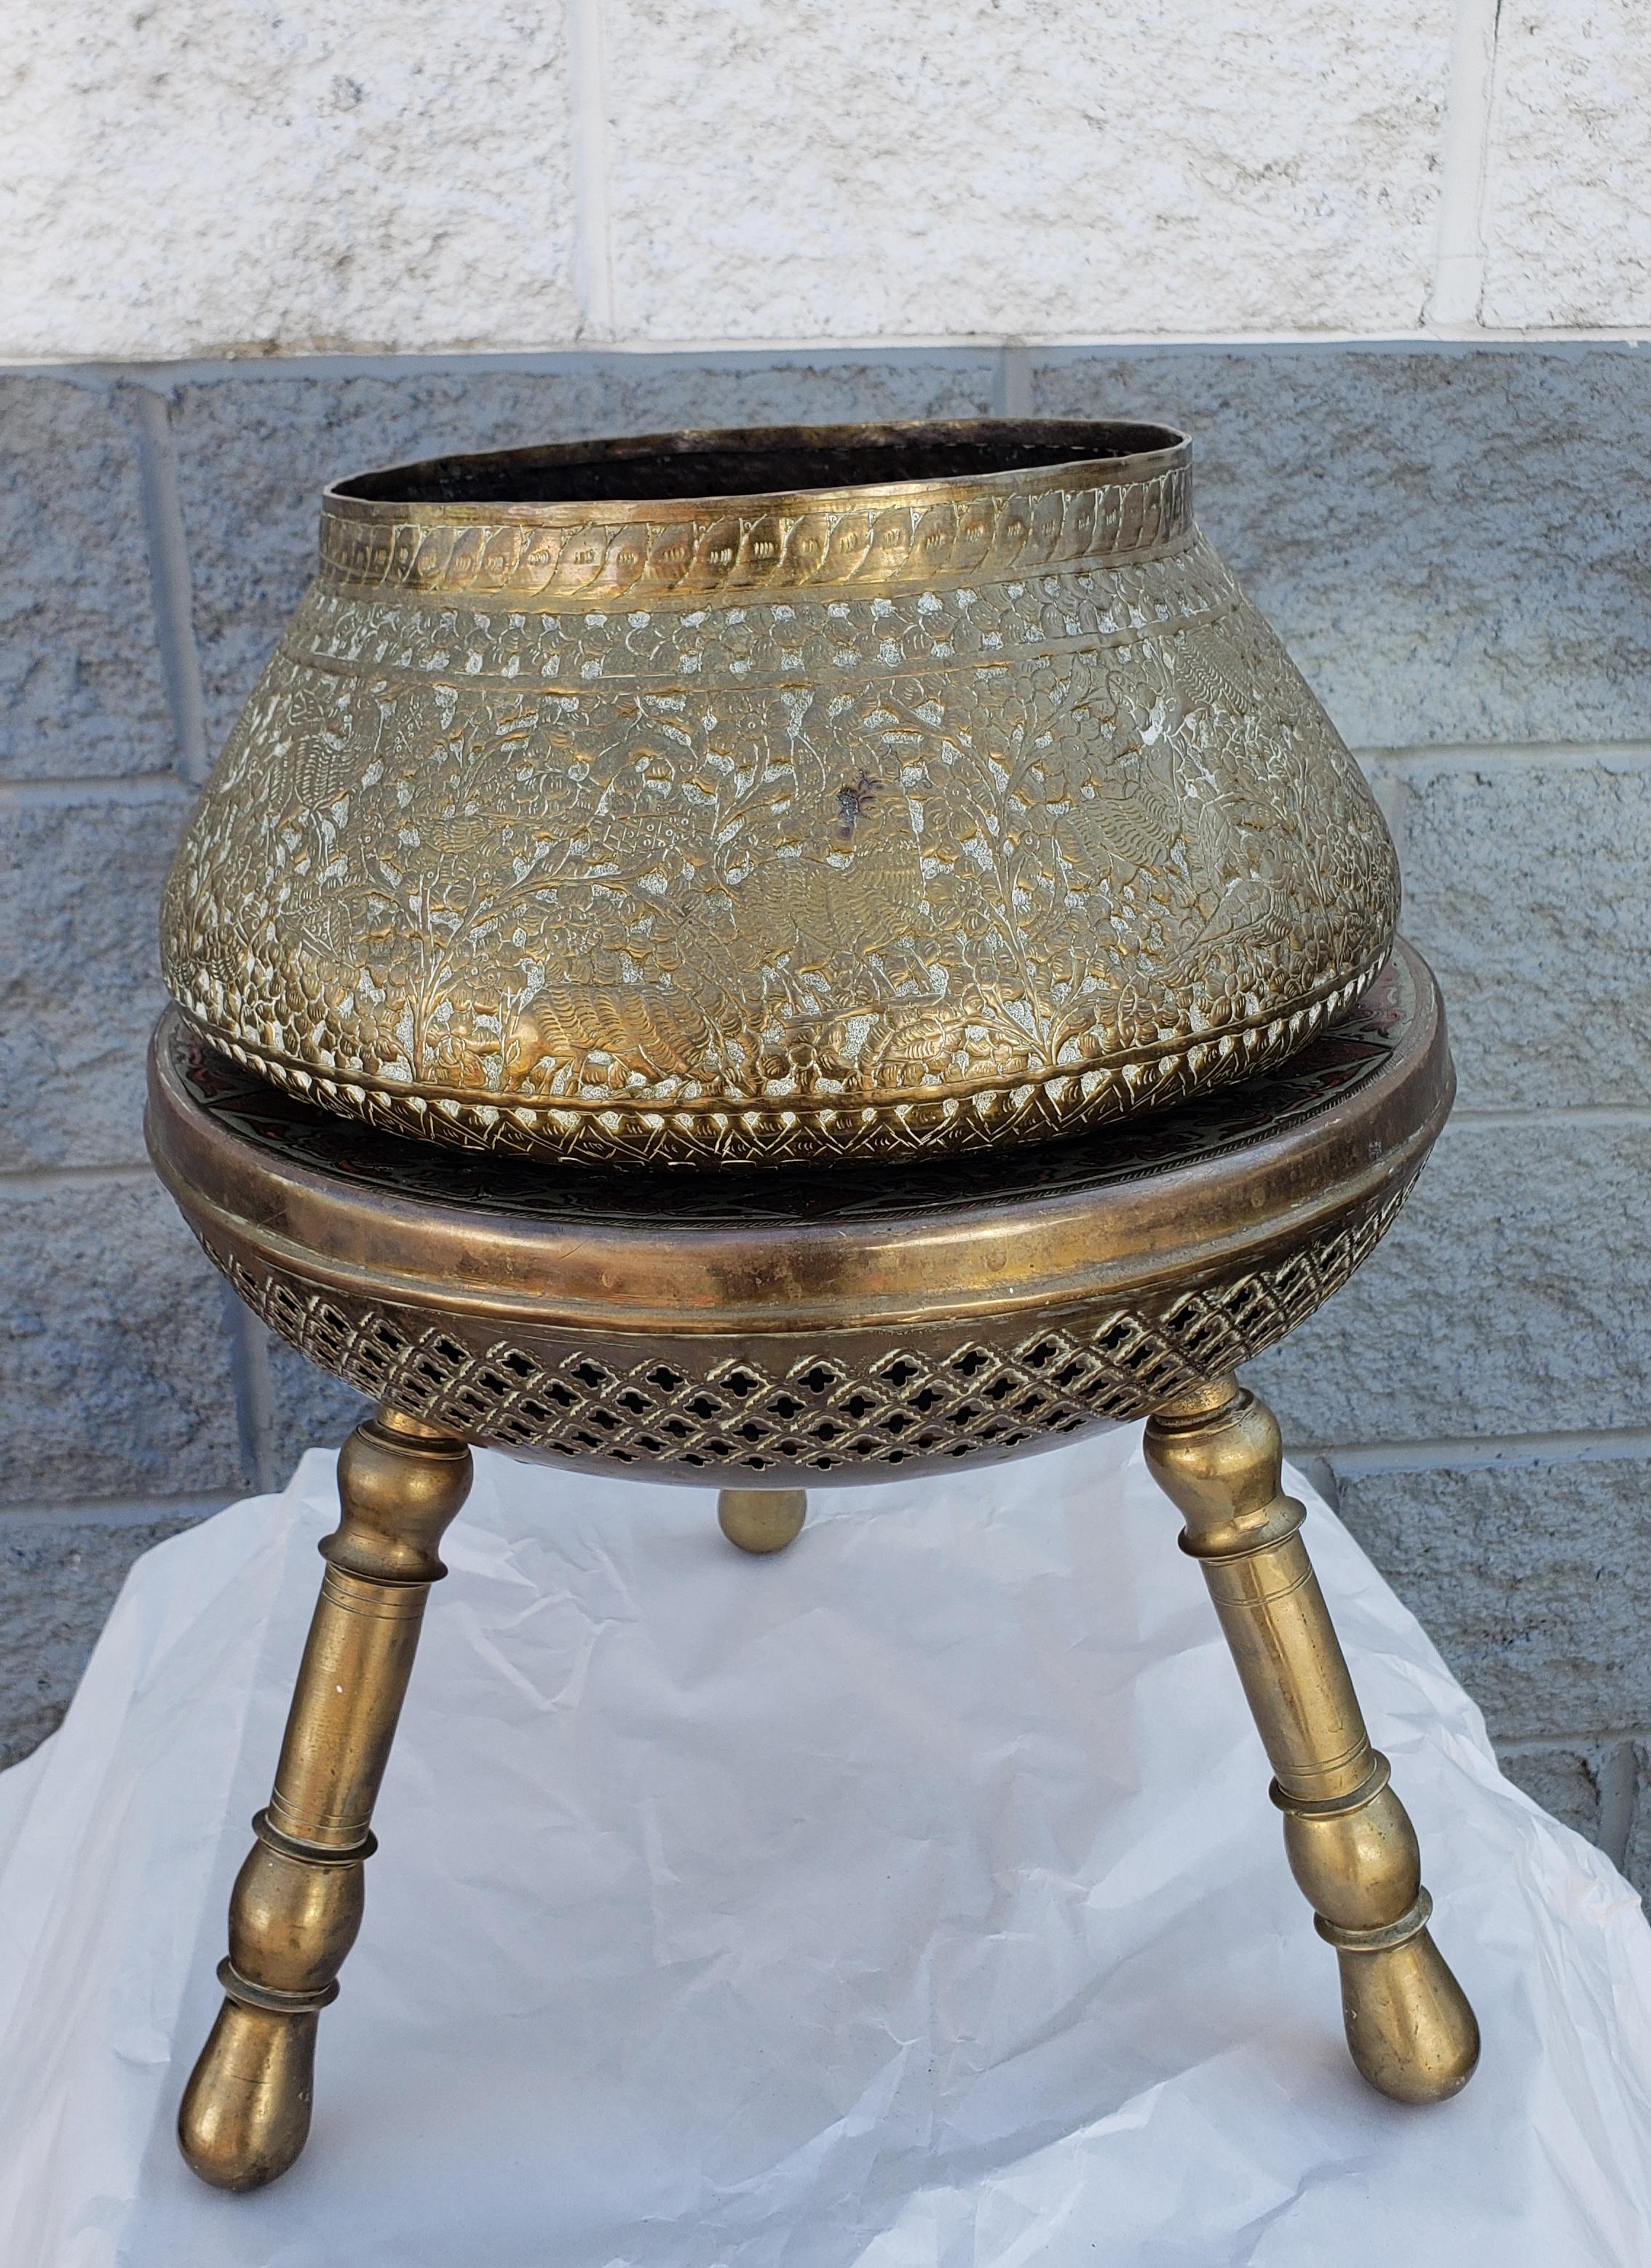 Indian Repoussé & engraved brass bowl / planter on engraved brass stand / stool. Large antique Anglo- Indian brass bowl or planter with amazing, very detailed engravings and Repoussés. Profusely chased with vines and vegetal motifs, detailed human,